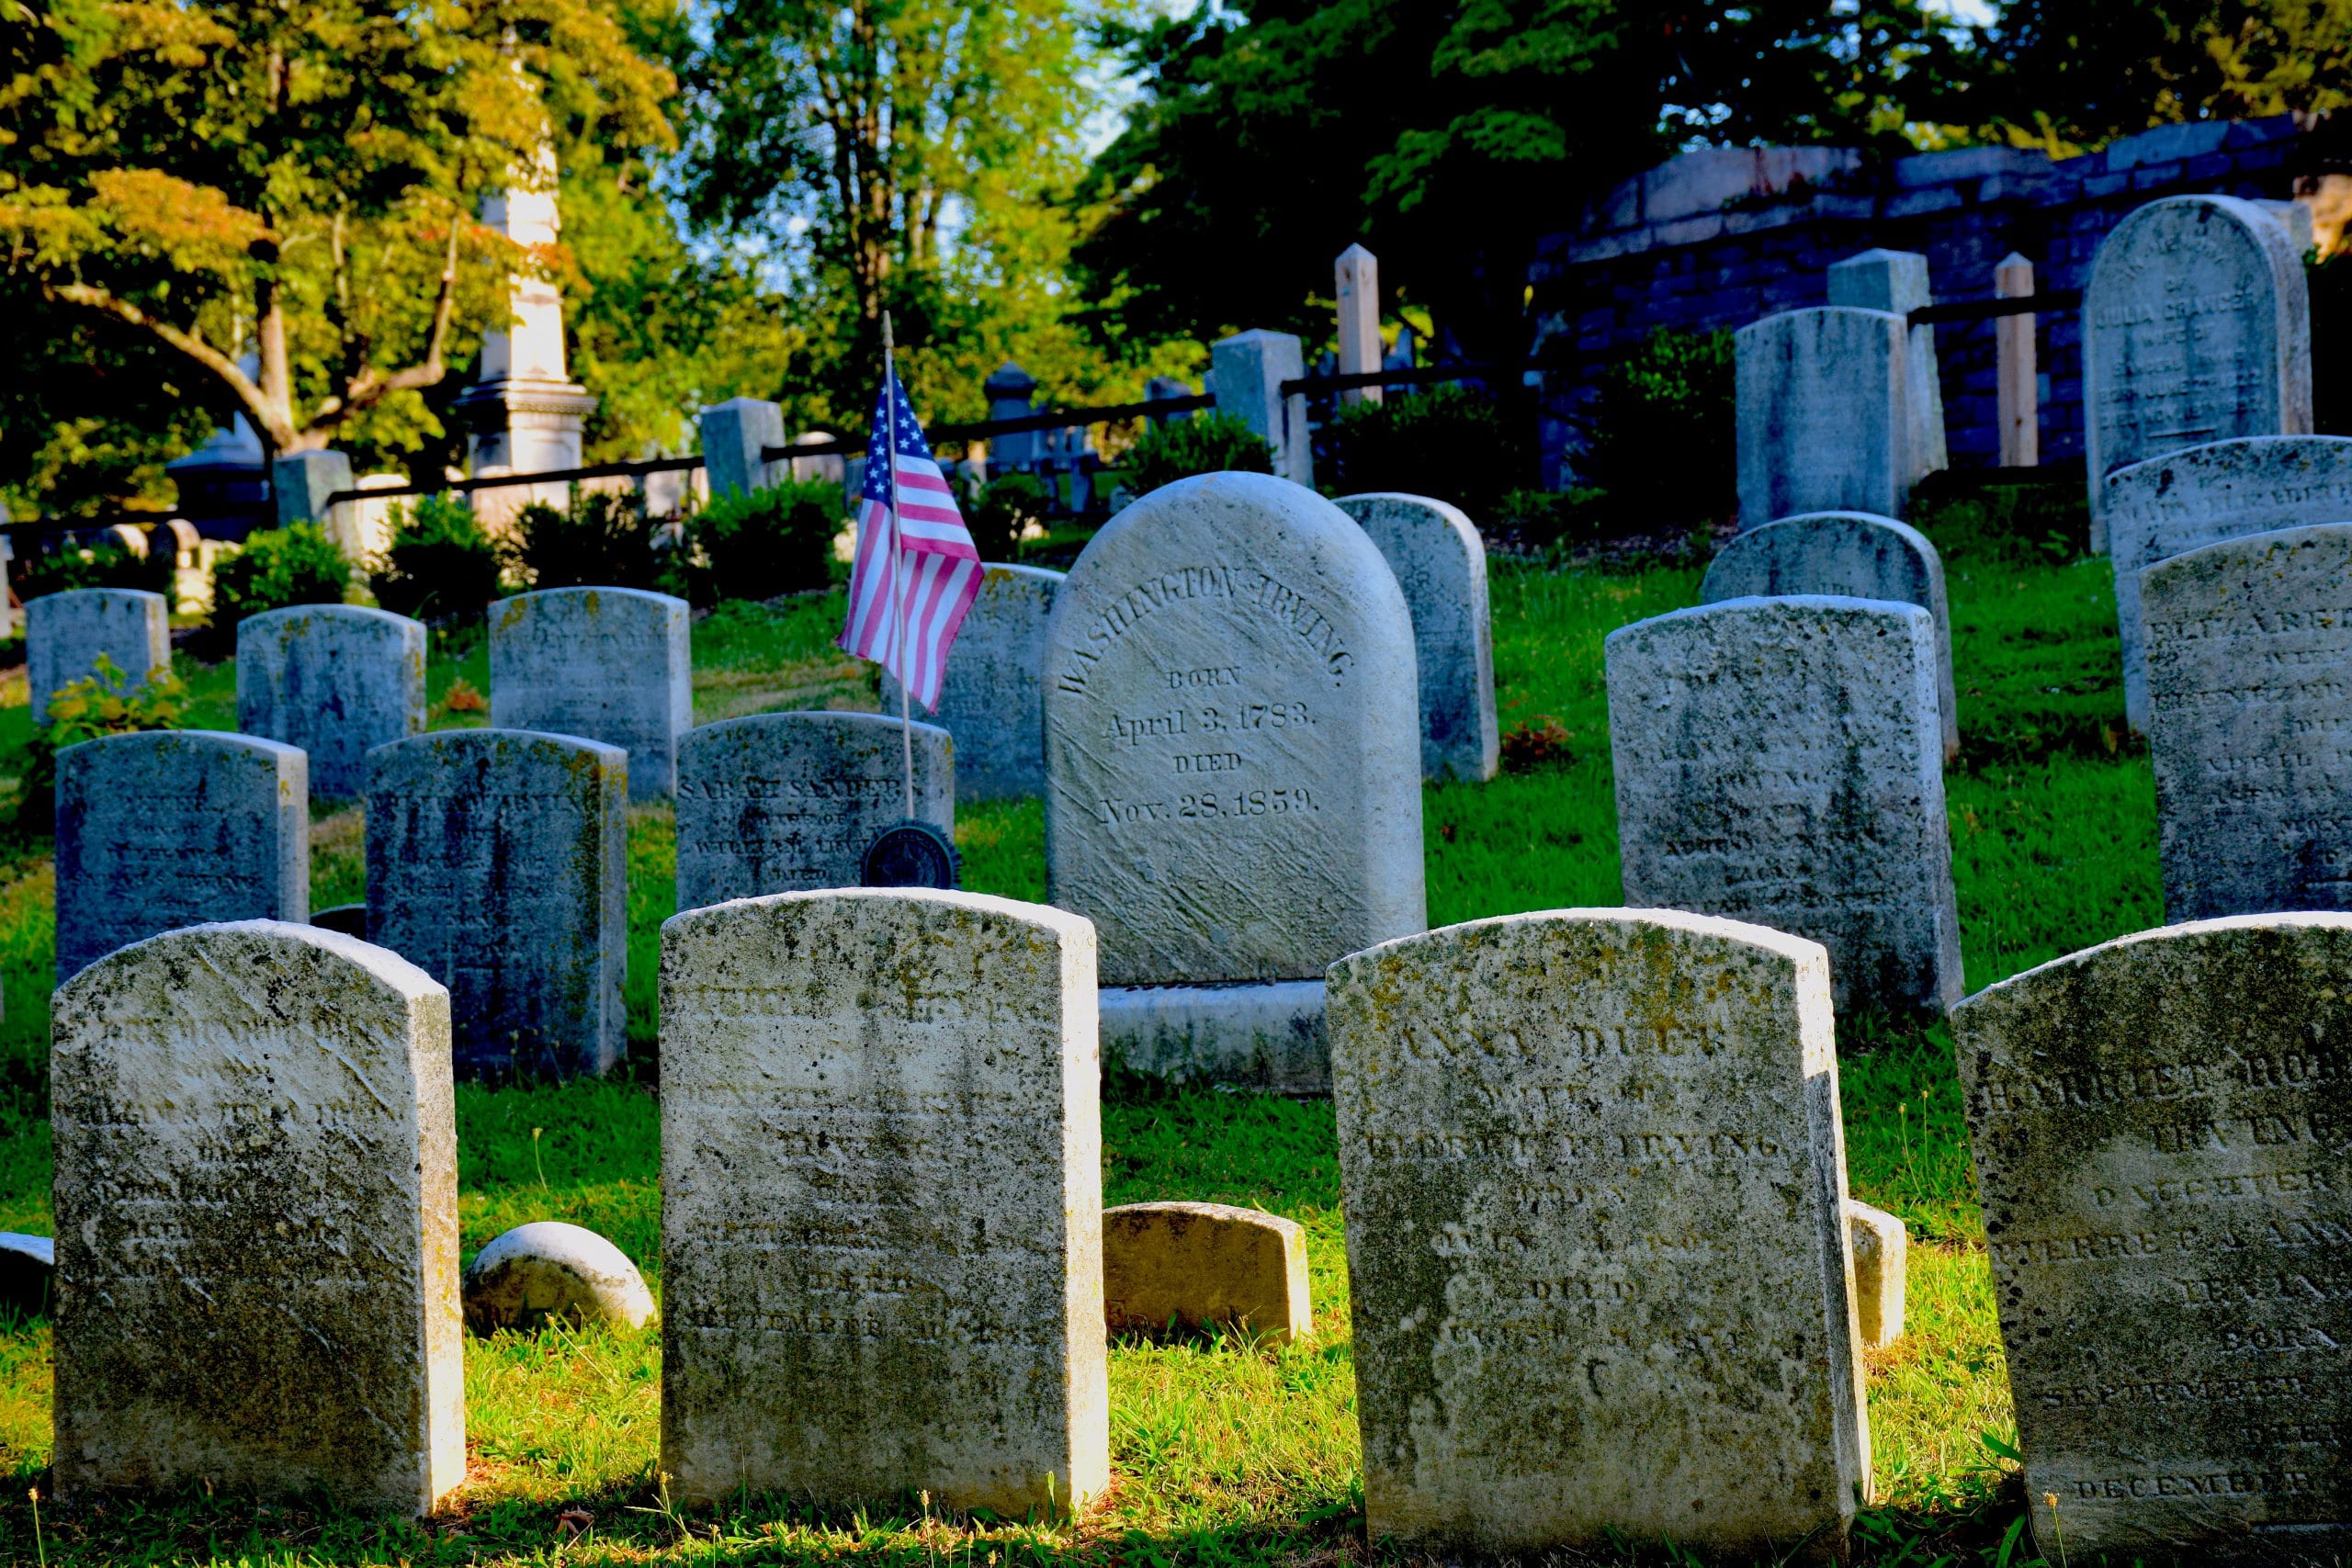 Irving family plot in Sleepy Hollow Cemetery and the grave of Washington Irving